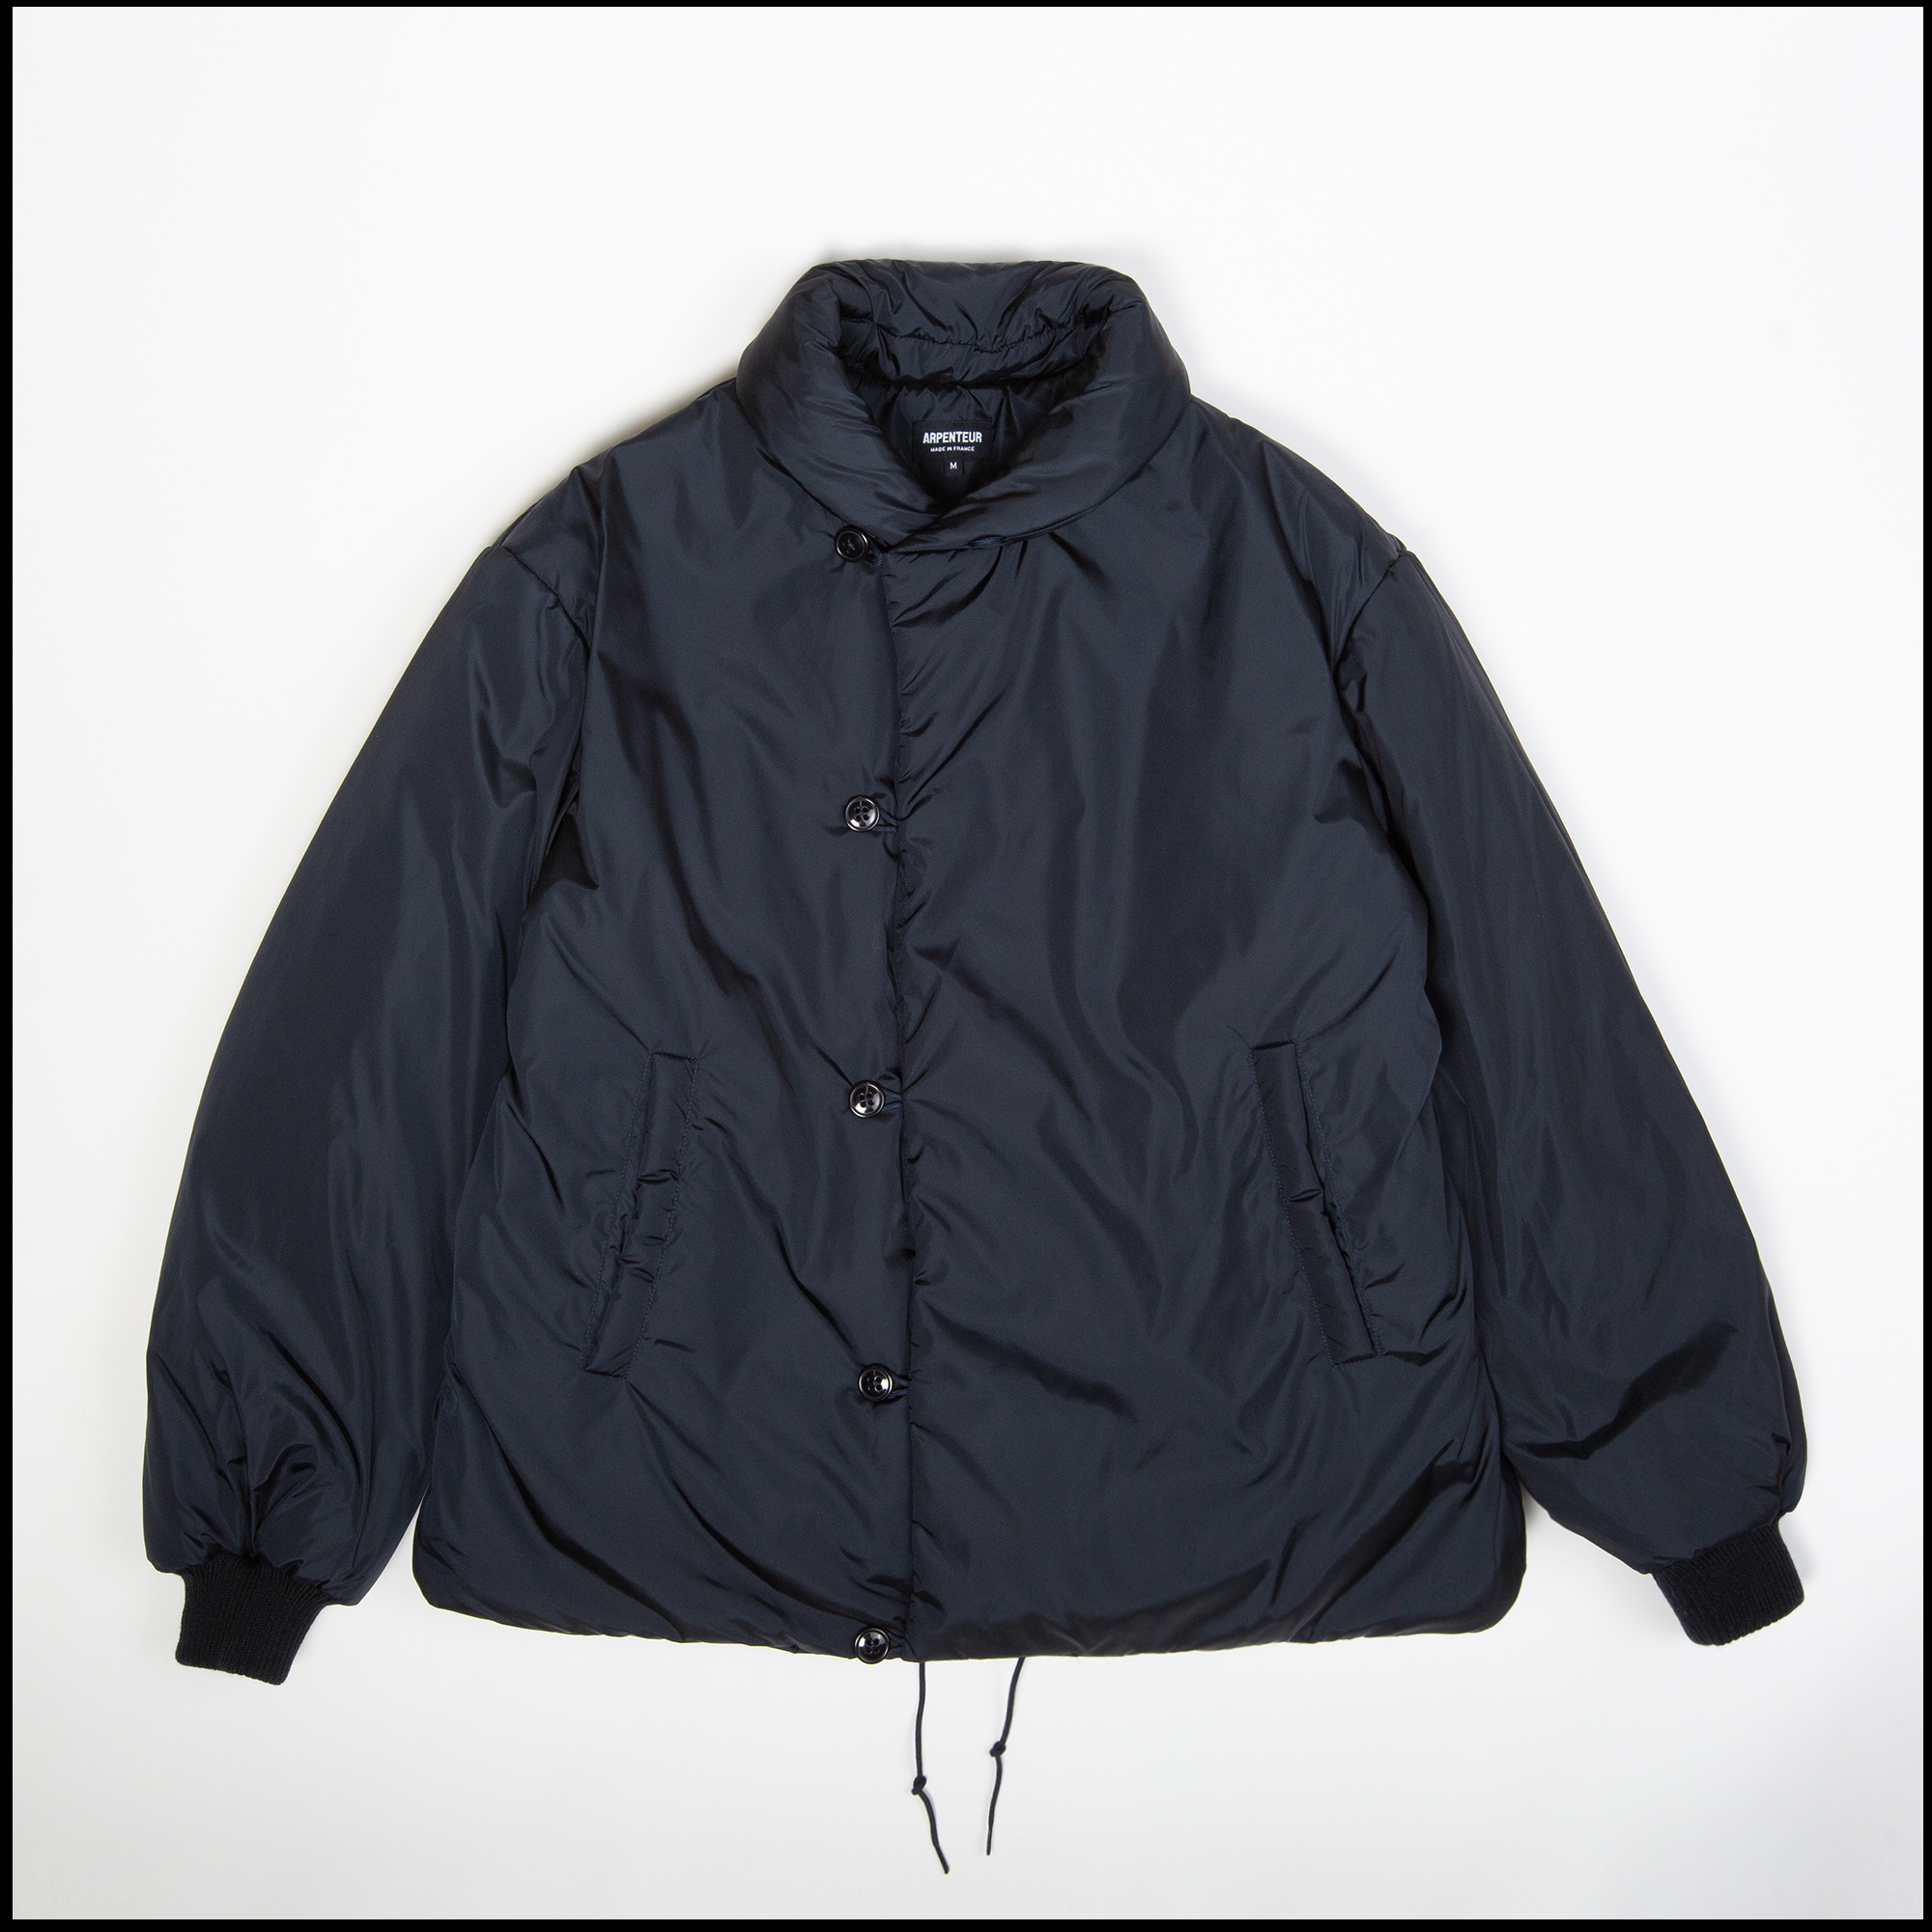 LOFT JACKET IN MIDNIGHT COLOR BY ARPENTEUR